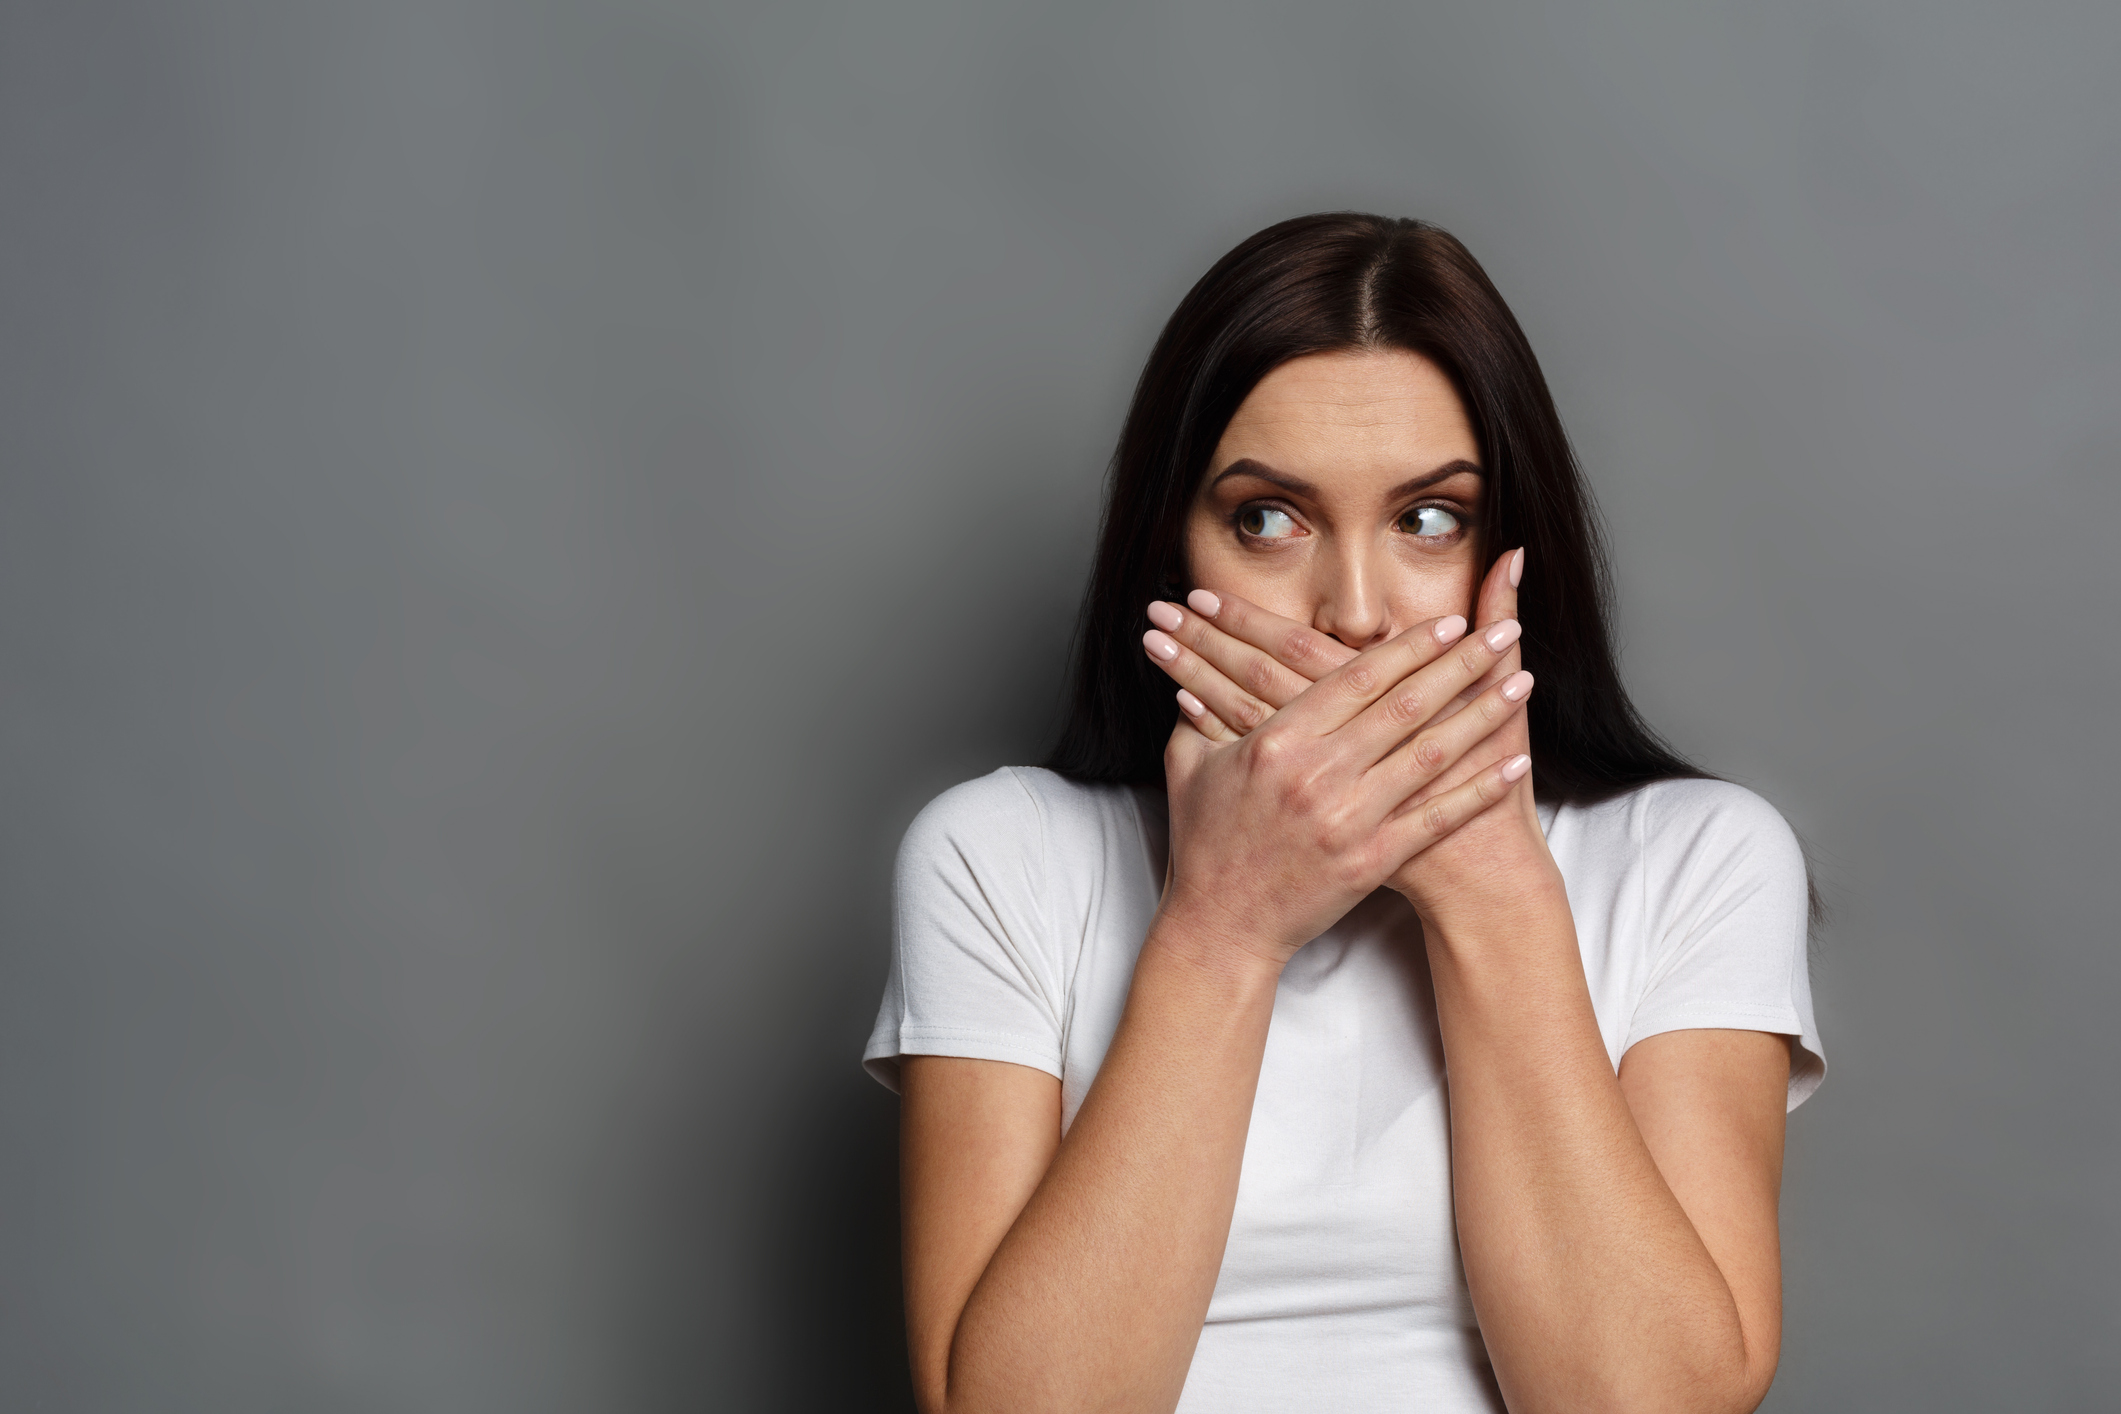 Scared woman covering mouth with hands